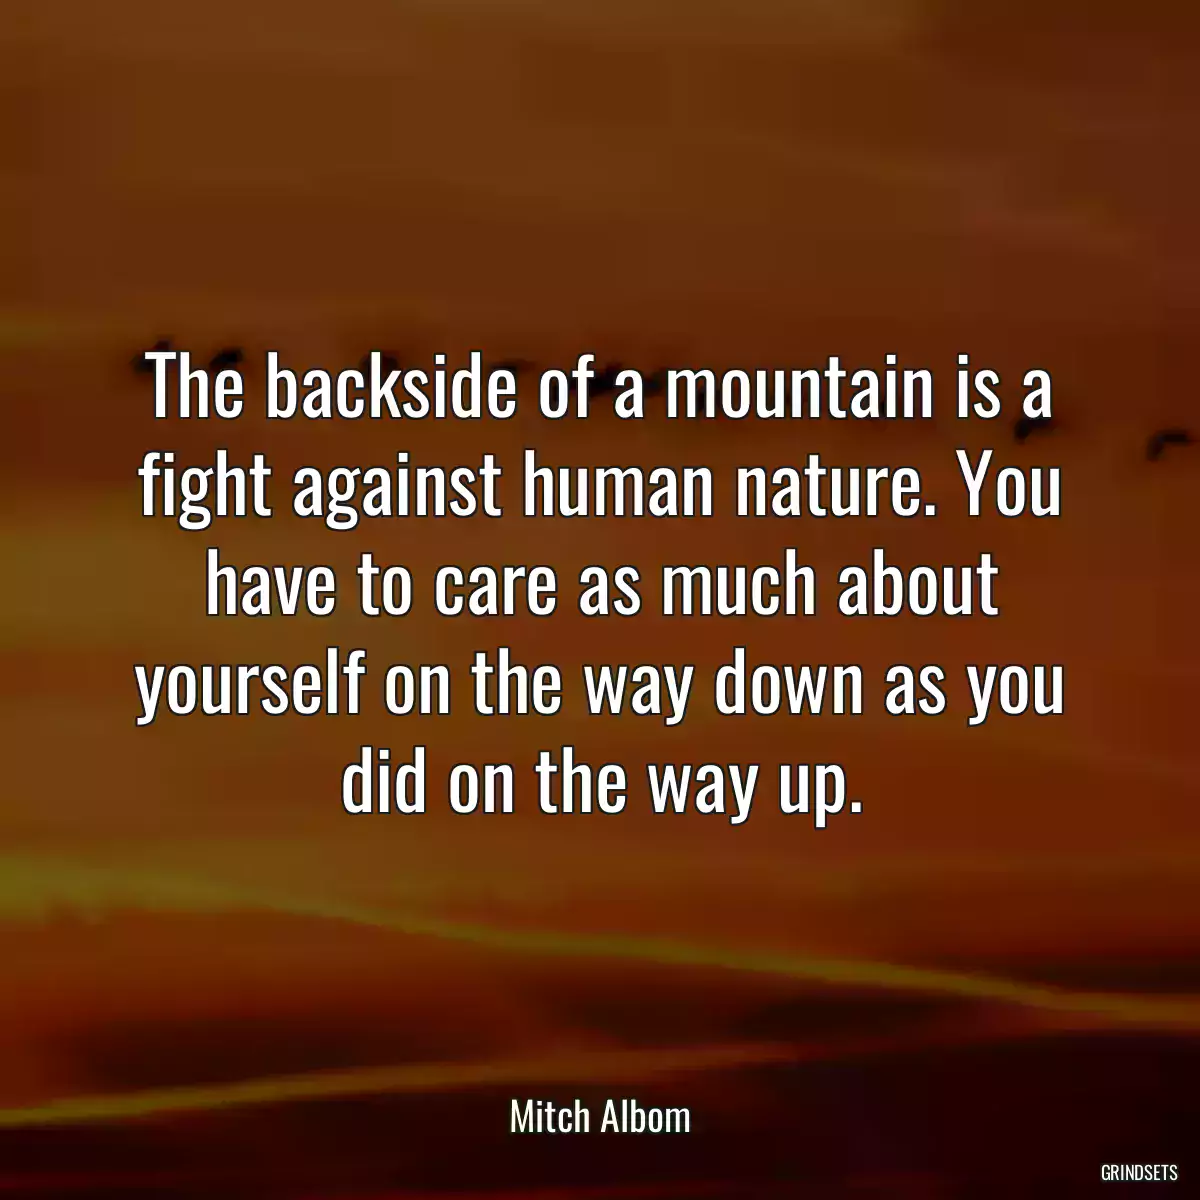 The backside of a mountain is a fight against human nature. You have to care as much about yourself on the way down as you did on the way up.